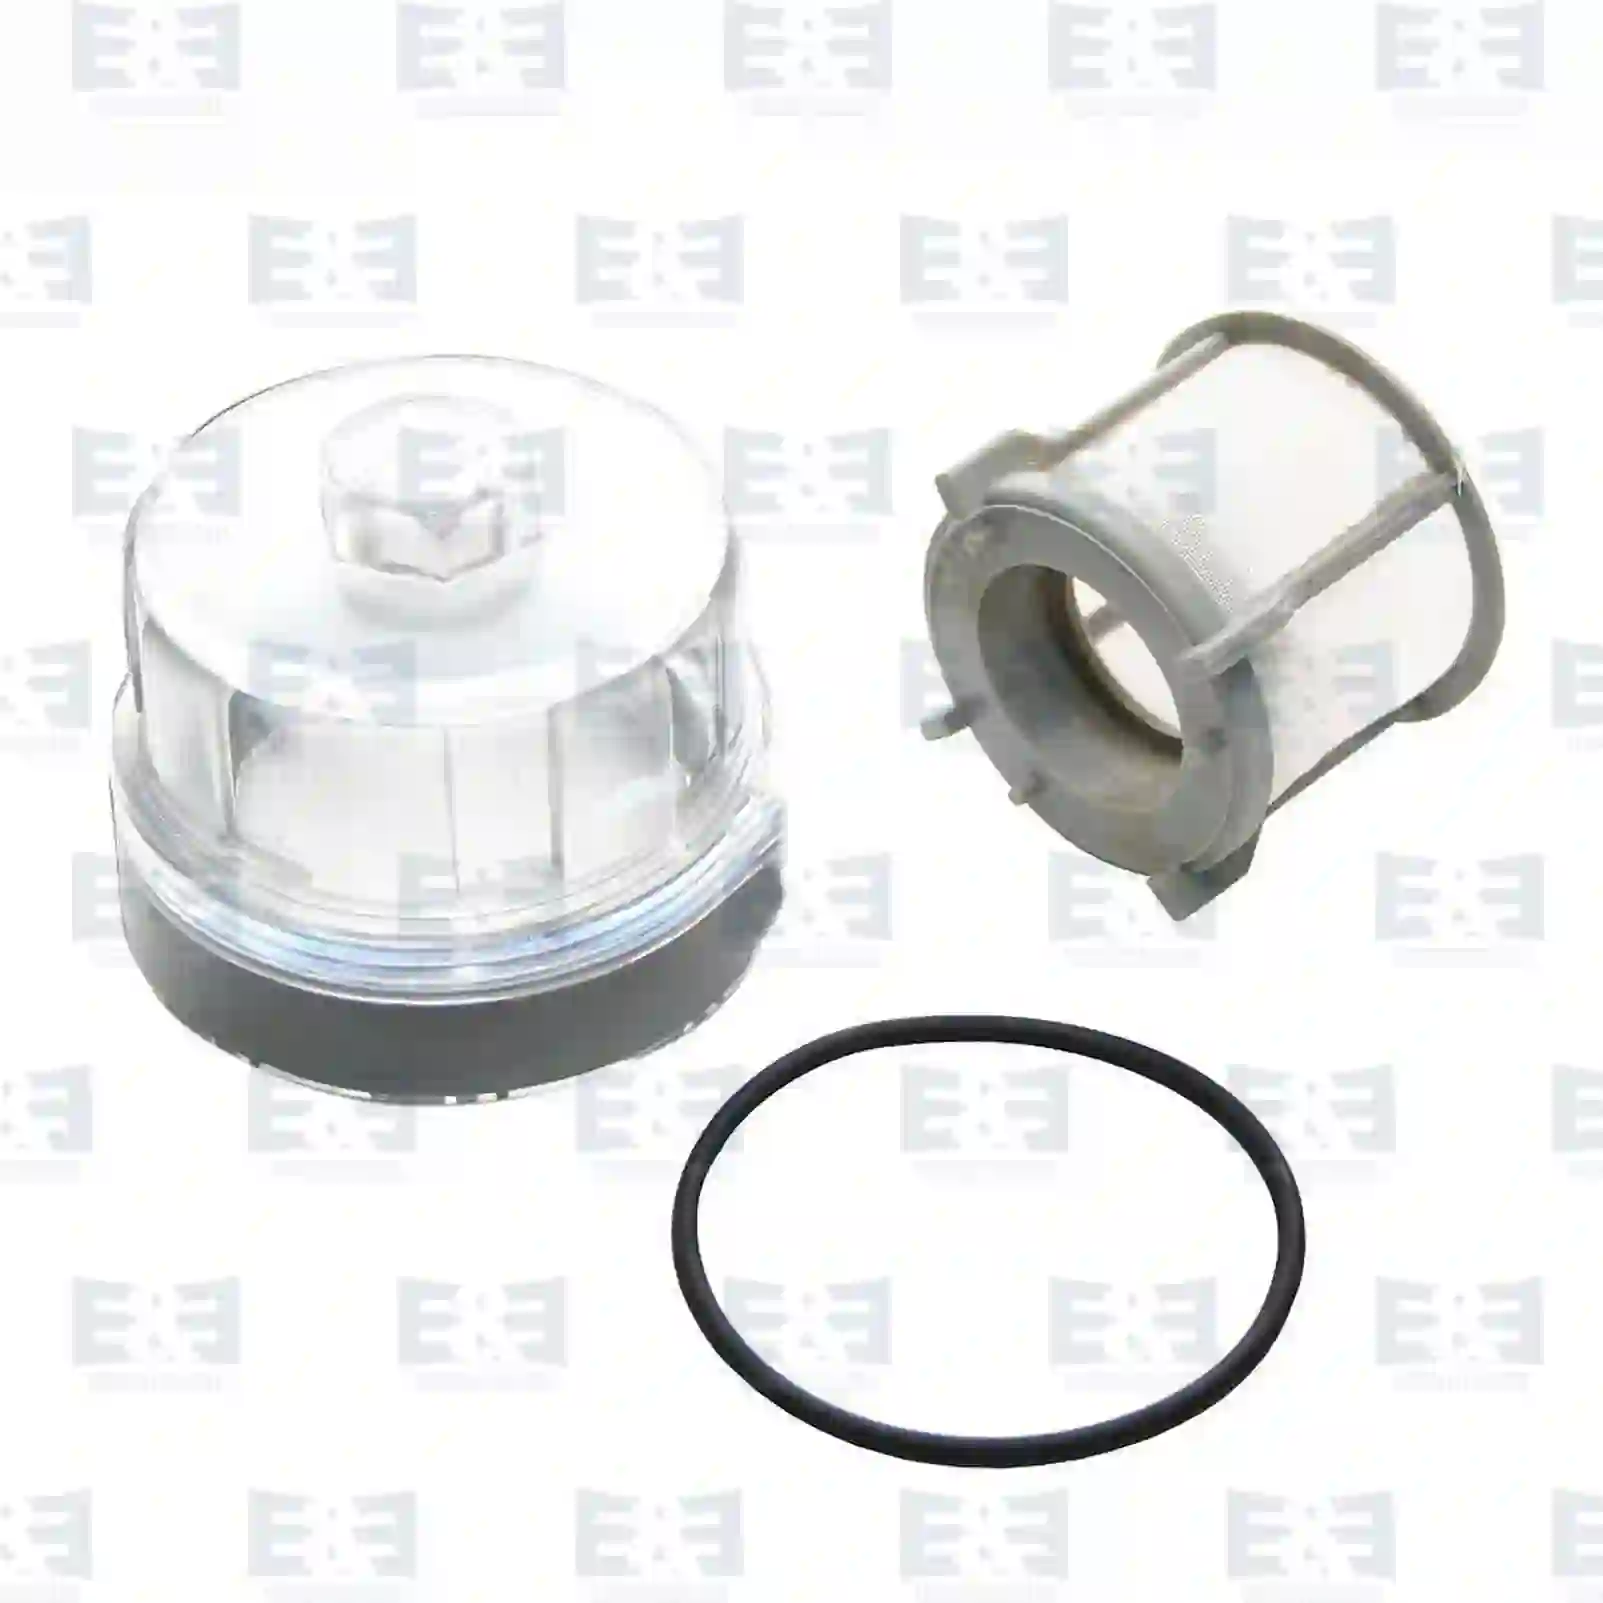 Filter repair kit, with filter housing, 2E2286030, 1604476, 51125020014S, 51125030062S, 0000900751S, 0000902051S, ZG10411-0008 ||  2E2286030 E&E Truck Spare Parts | Truck Spare Parts, Auotomotive Spare Parts Filter repair kit, with filter housing, 2E2286030, 1604476, 51125020014S, 51125030062S, 0000900751S, 0000902051S, ZG10411-0008 ||  2E2286030 E&E Truck Spare Parts | Truck Spare Parts, Auotomotive Spare Parts